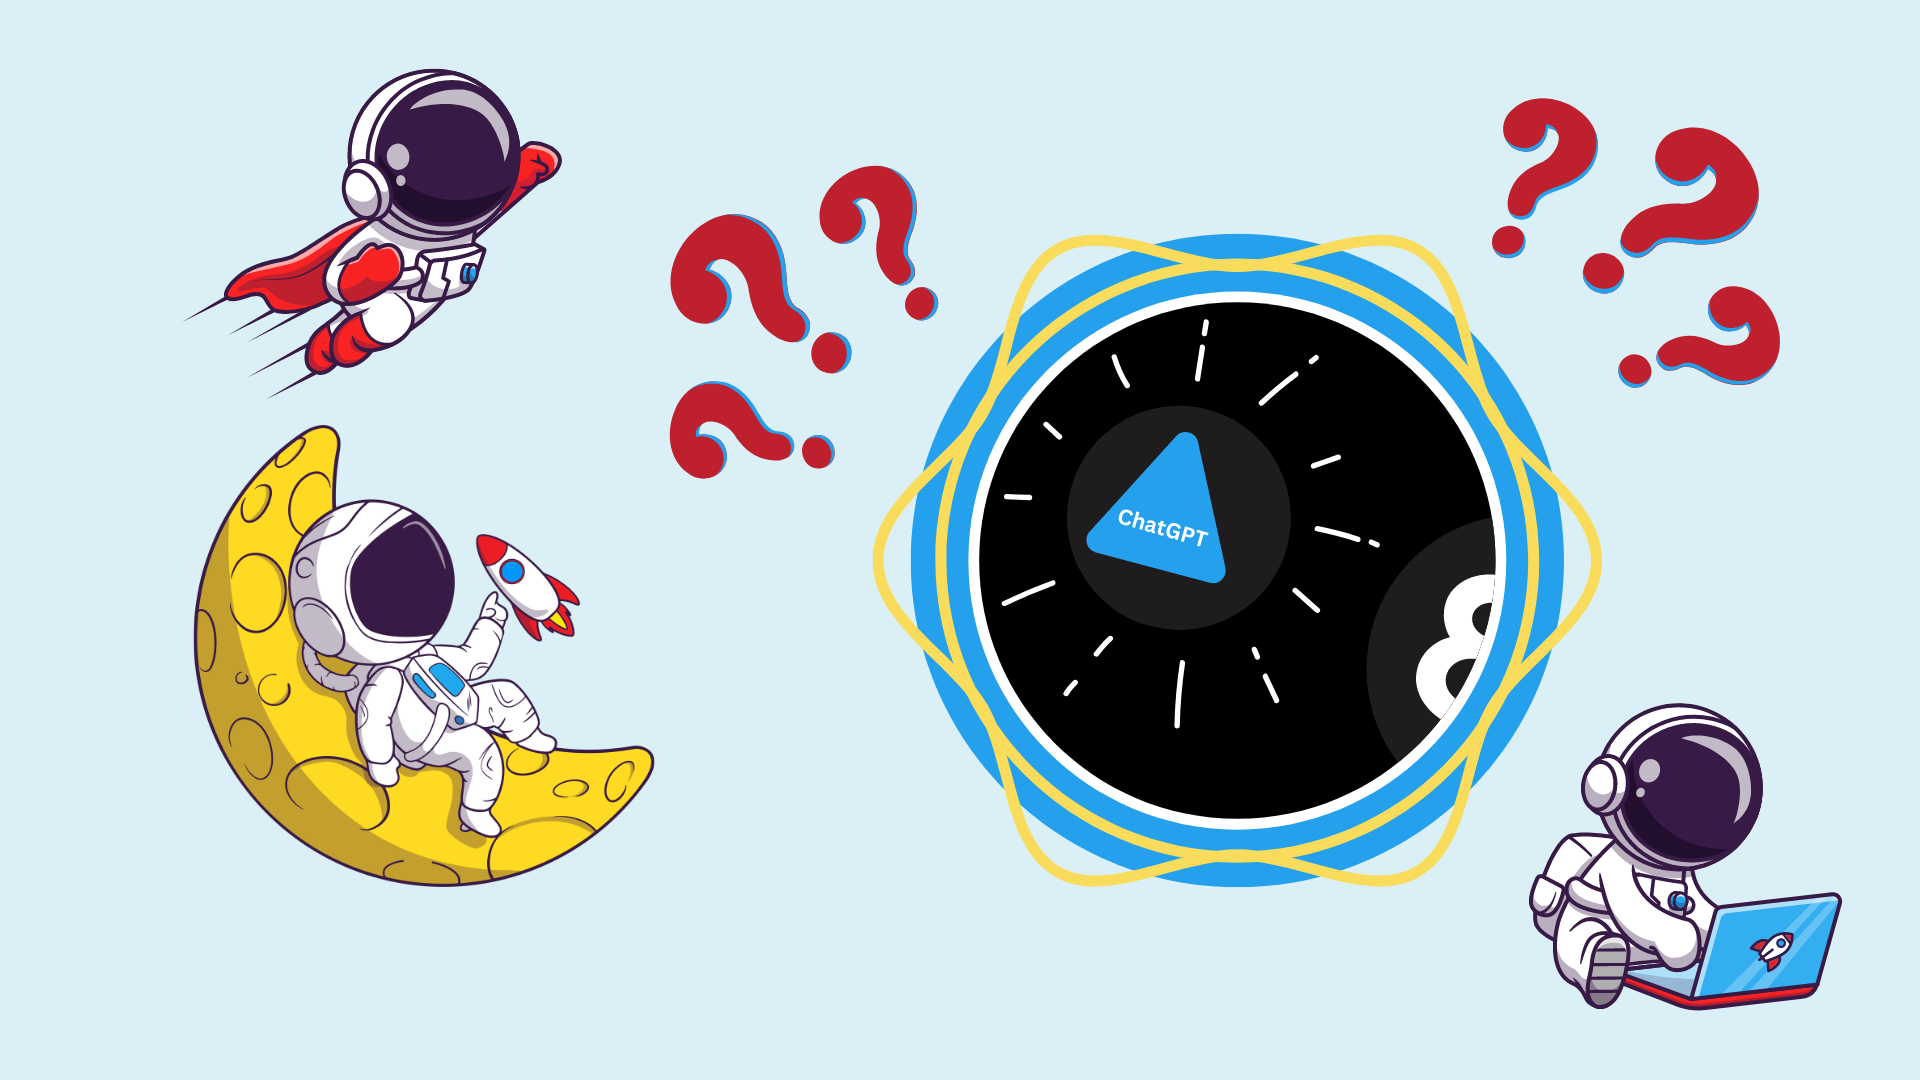 A light blue banner showing cartoon style illustrations of a magic 8 ball surrounded by question marks and astronauts using a laptop, lounging on the moon and flying like a superhero.